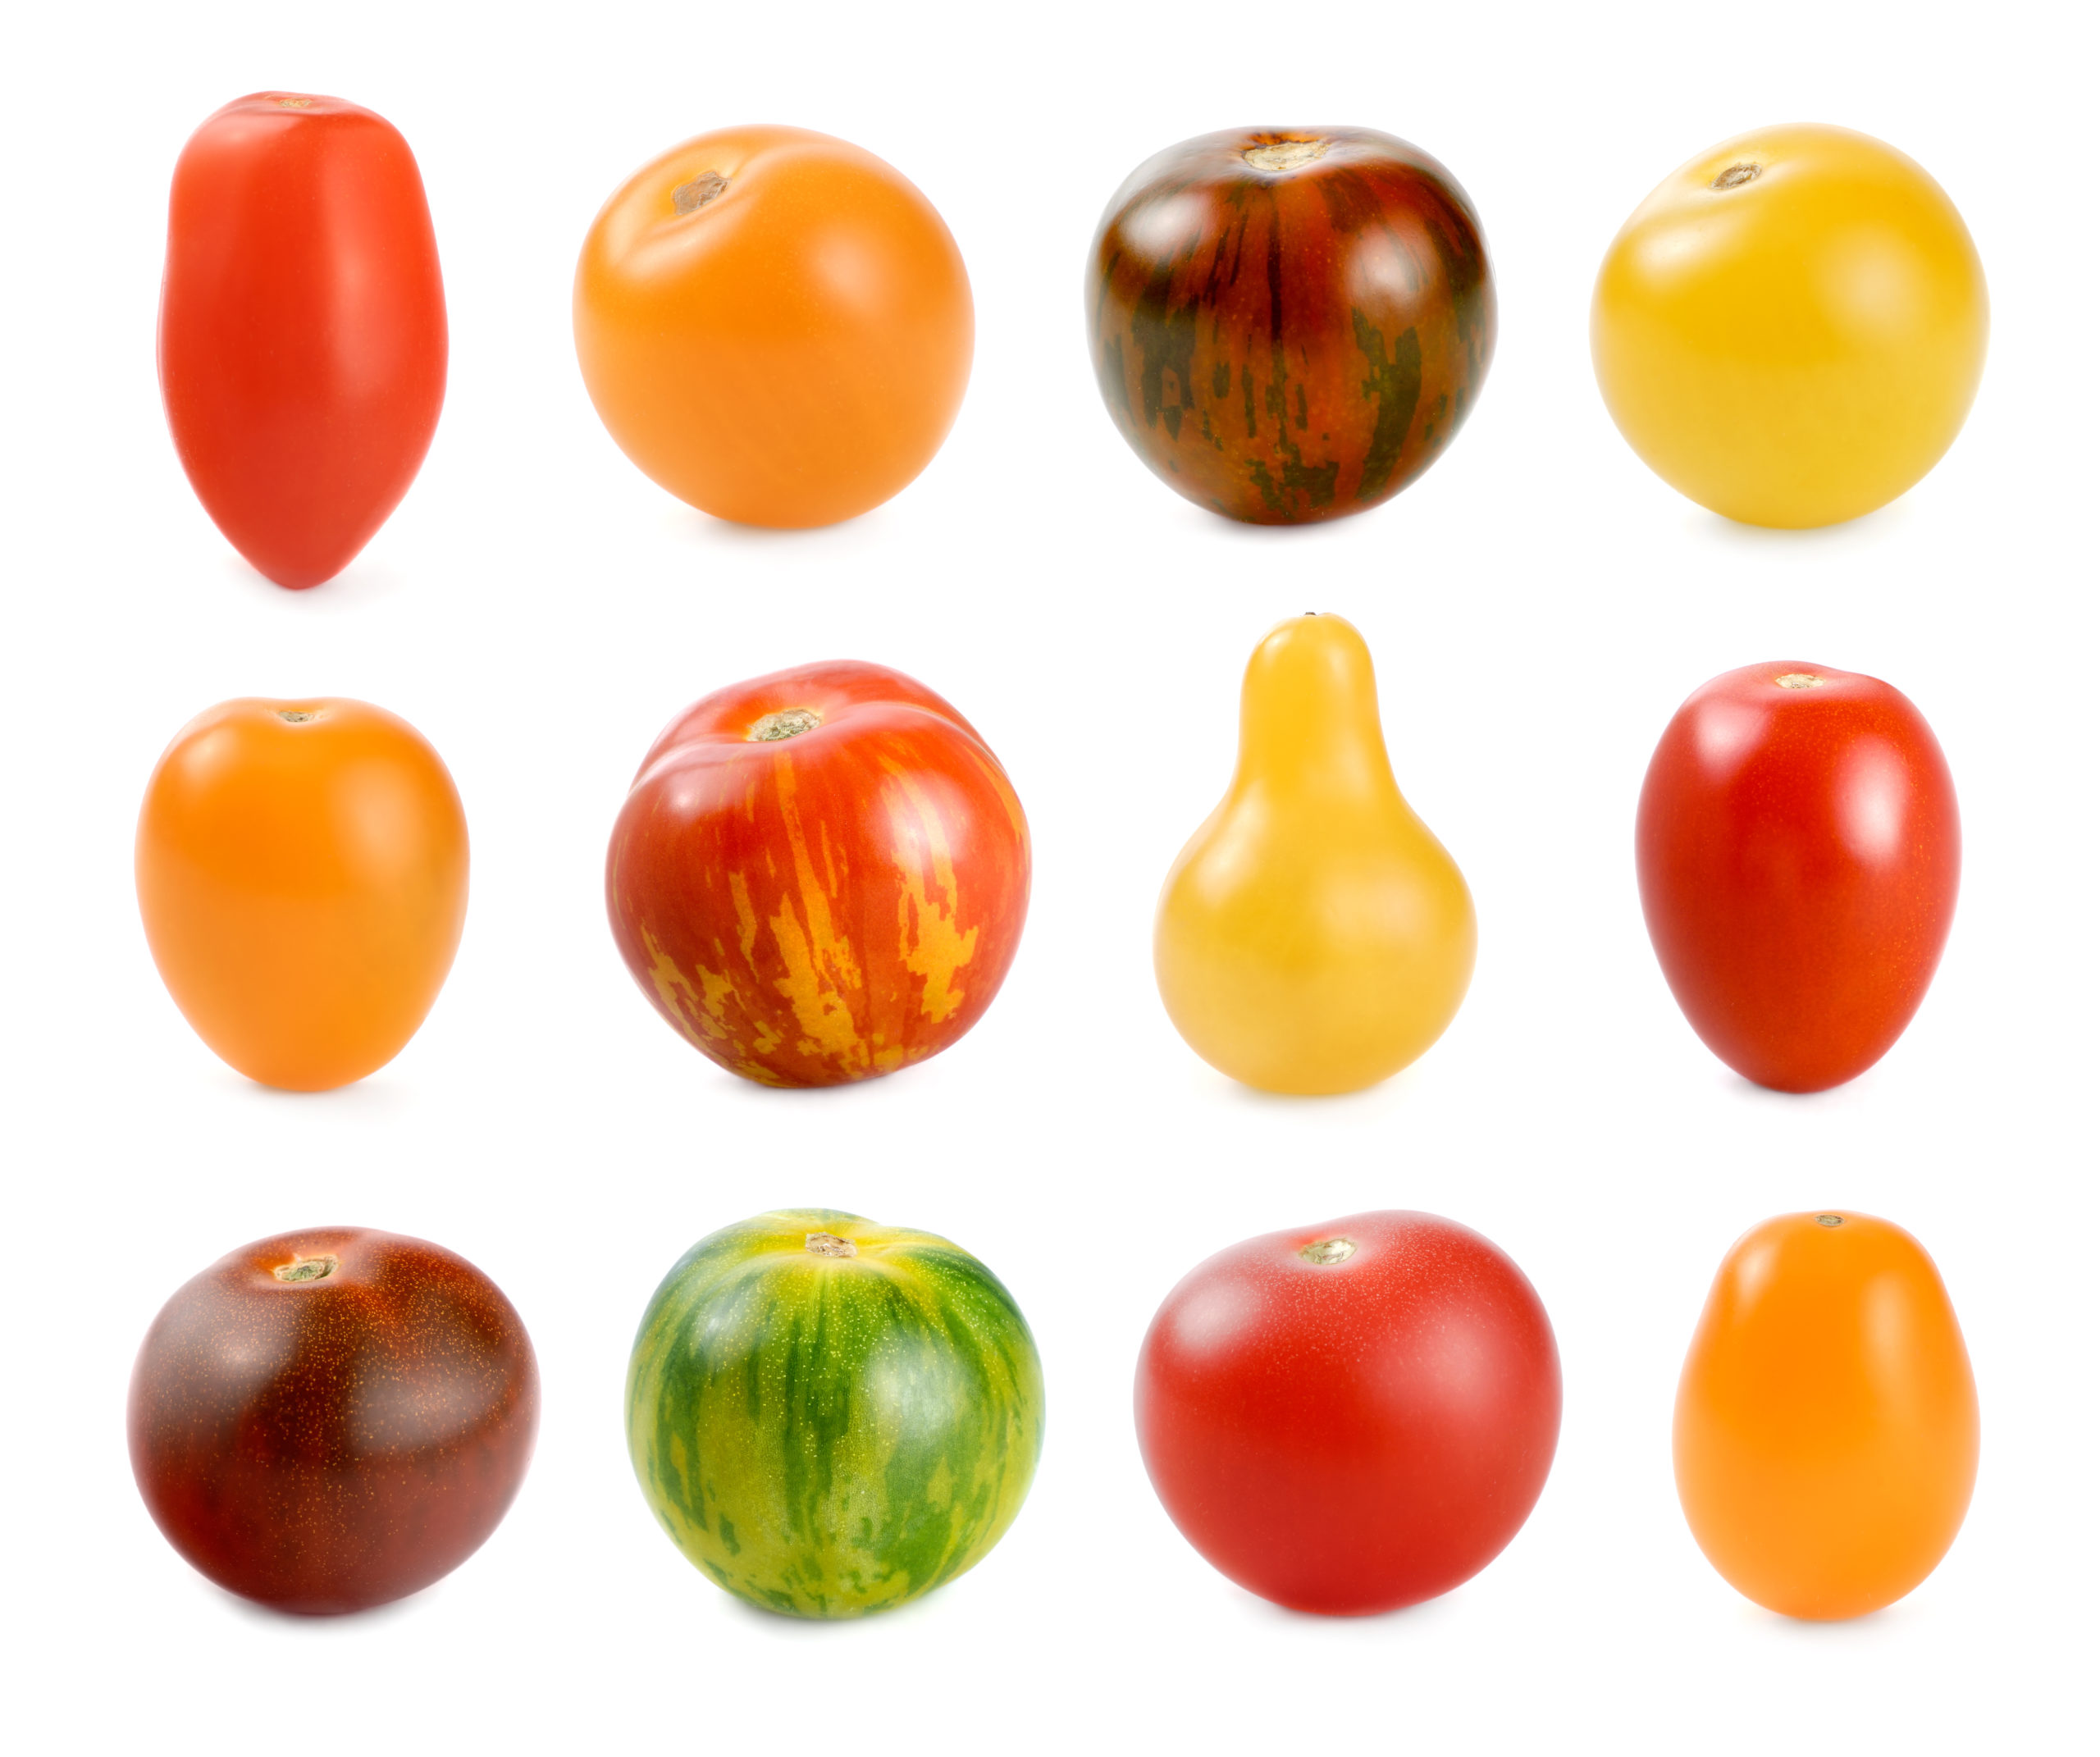 The GardenZeus Guide to Choosing the Best Tomato Varieties For Your Garden